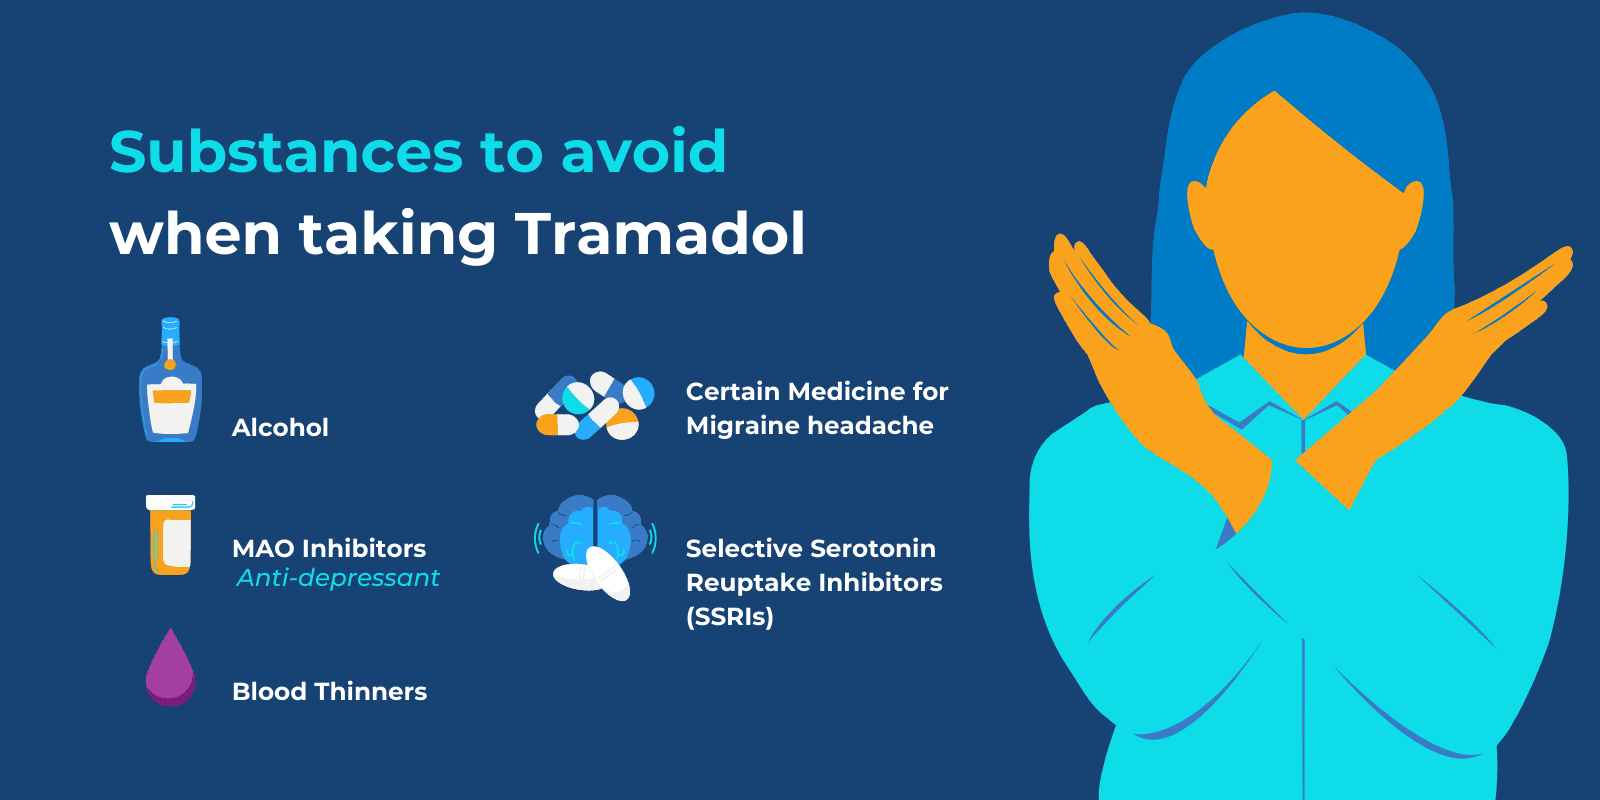 "Substances To Avoid When Taking Tramadol" " Alcohol, MAO Inhibitors, Certain medicine for migraine headache, blood thinners, and SSRIs" illustrated with relevant illustrations written next to an illustration of a woman making x sign with her arms